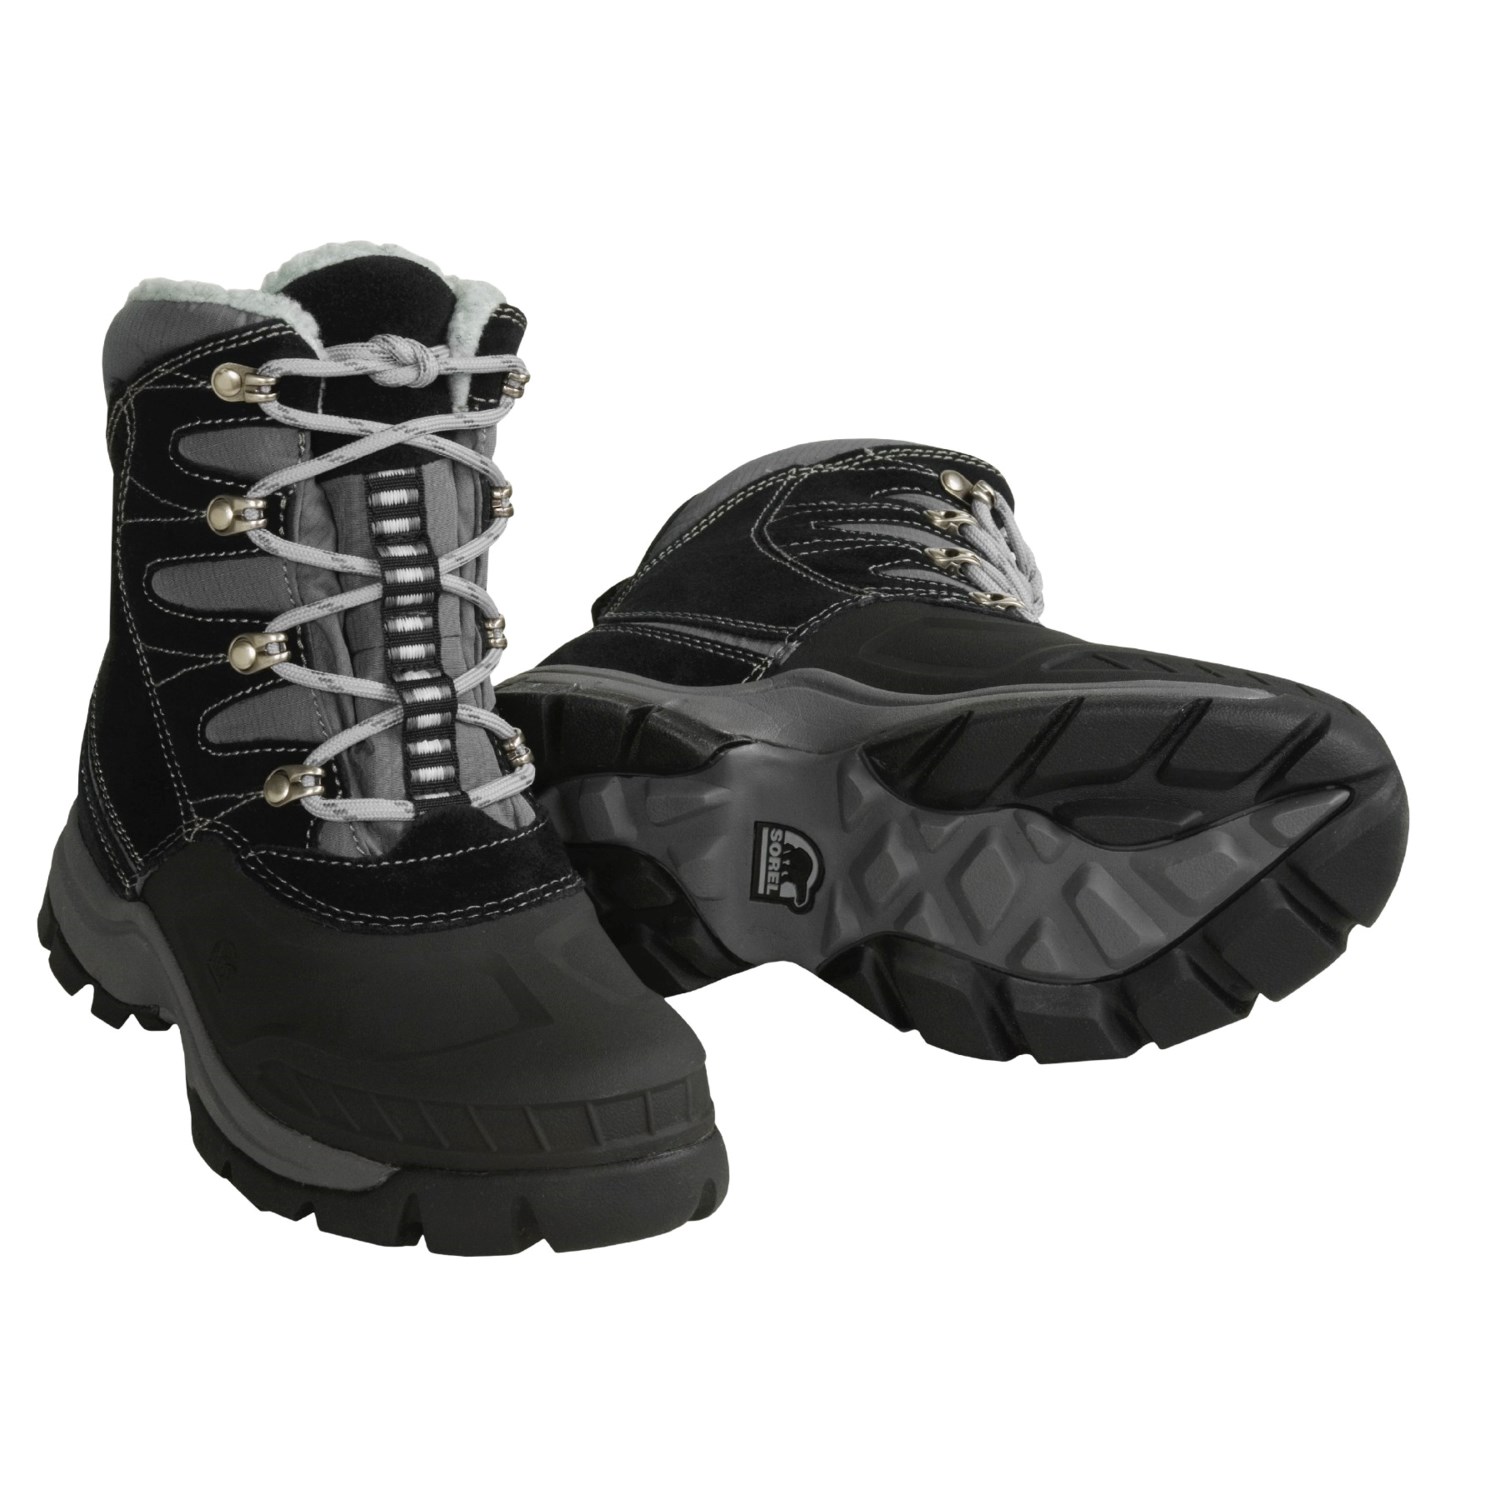 Sorel Timberwolf -25°F Rated Winter Boots (For Women) 18634